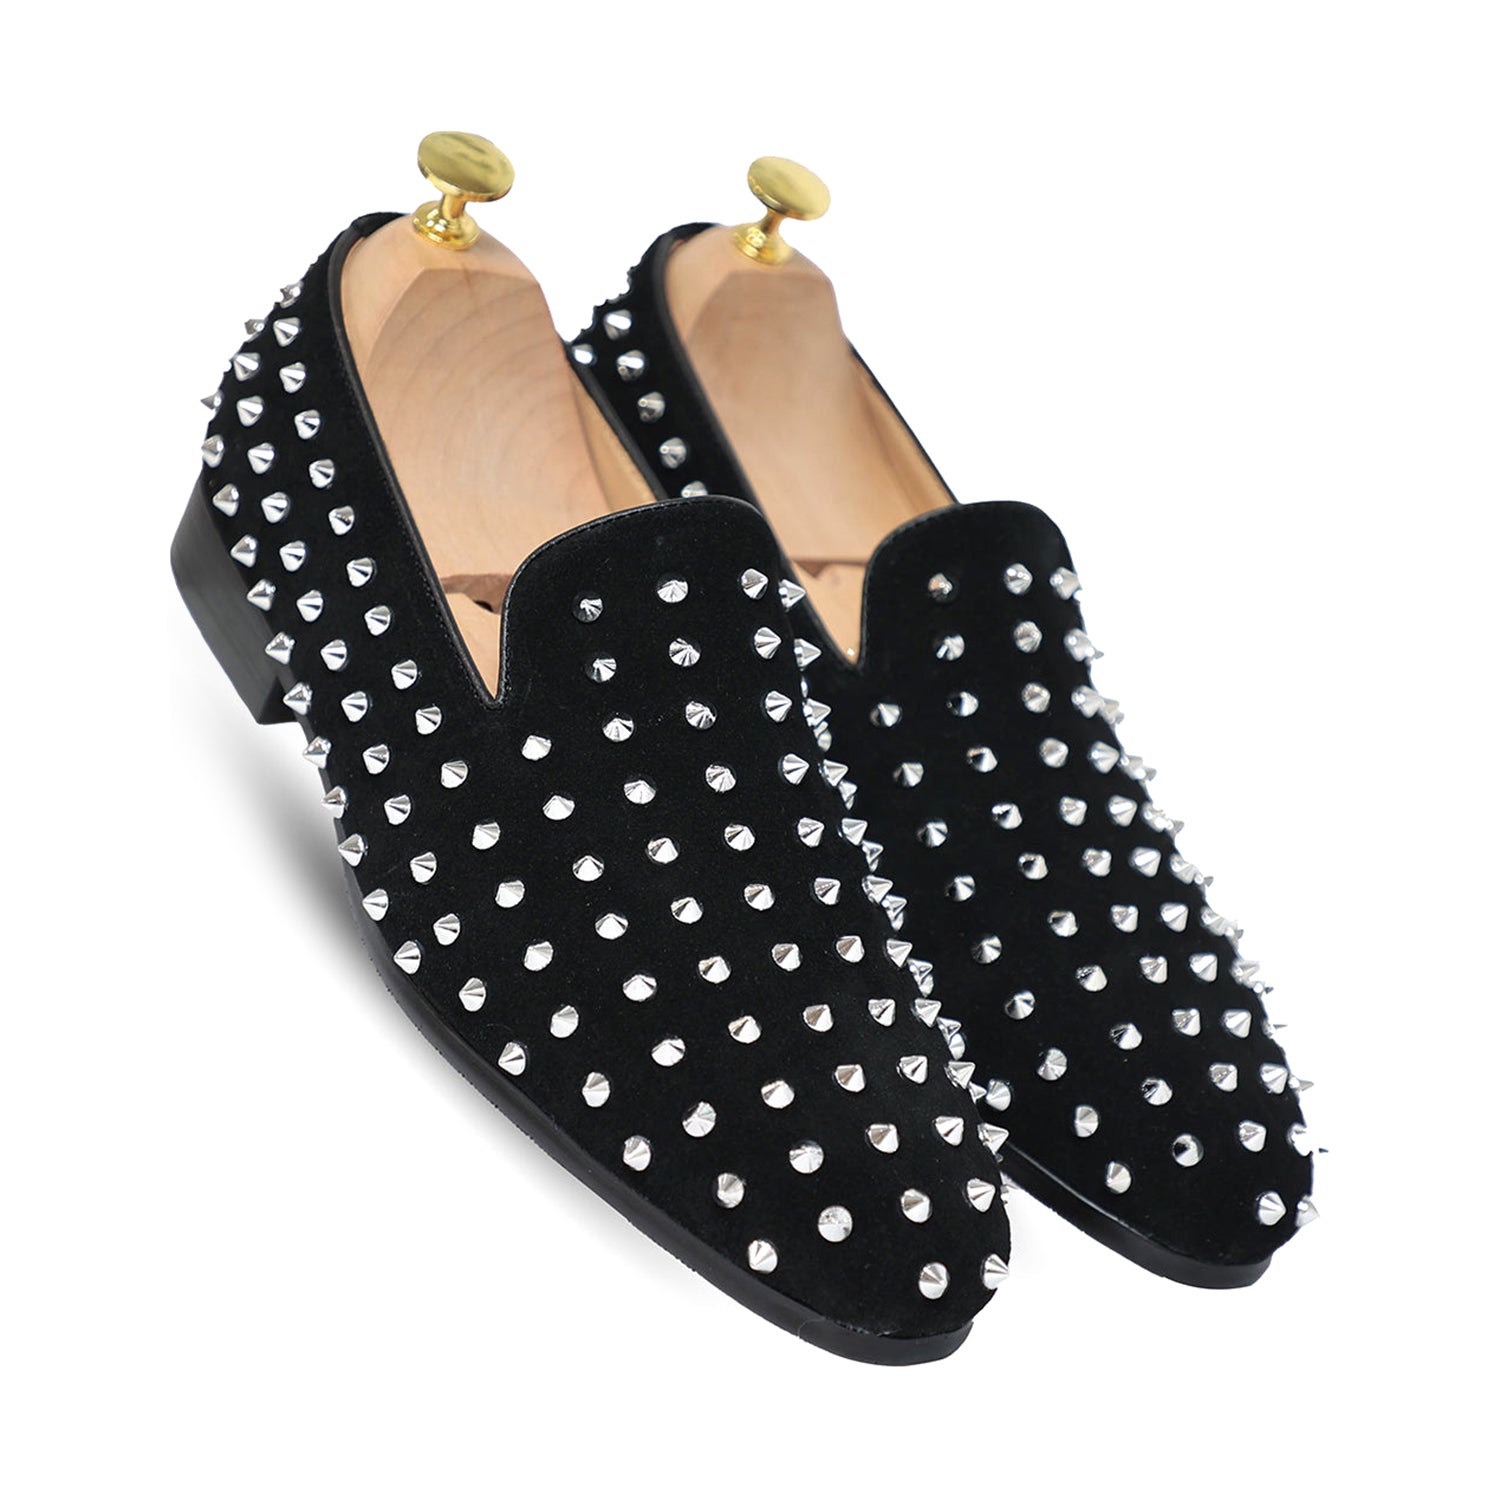 Suede Studded Slip On Loafers